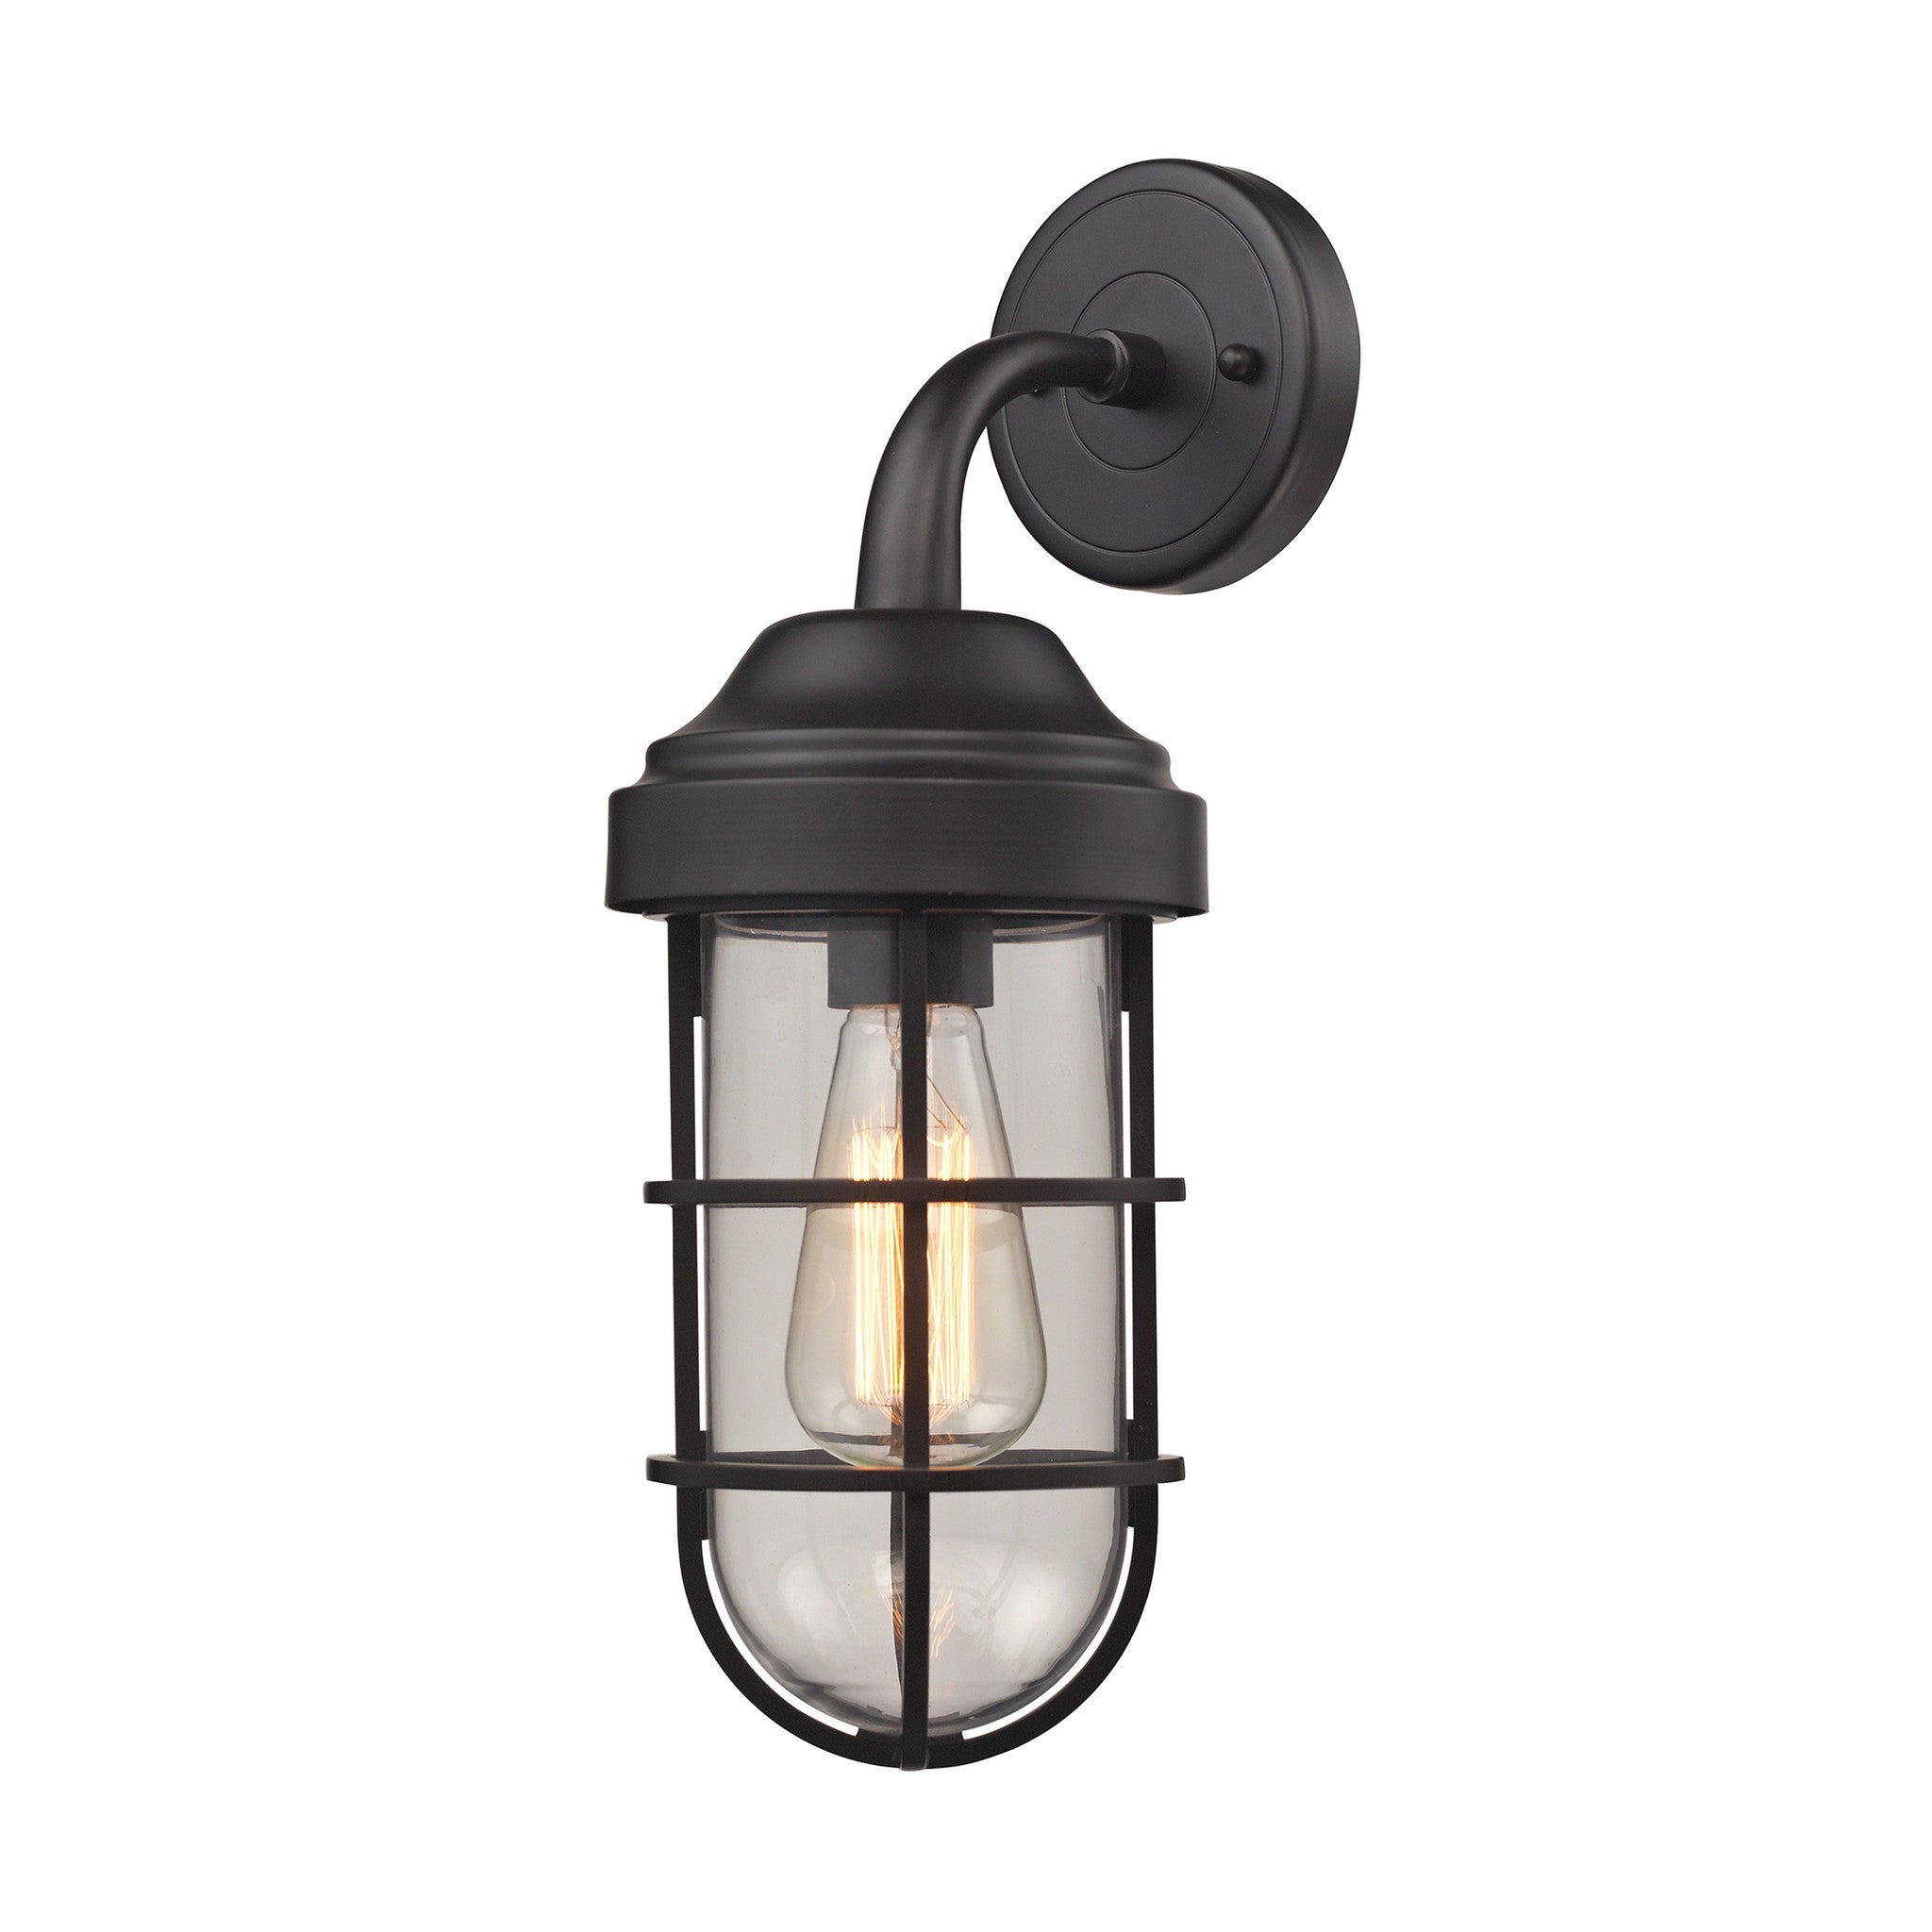 Seaport 1 Light Wall Sconce in Oil Rubbed Bronze by Elk Lighting 66365-1